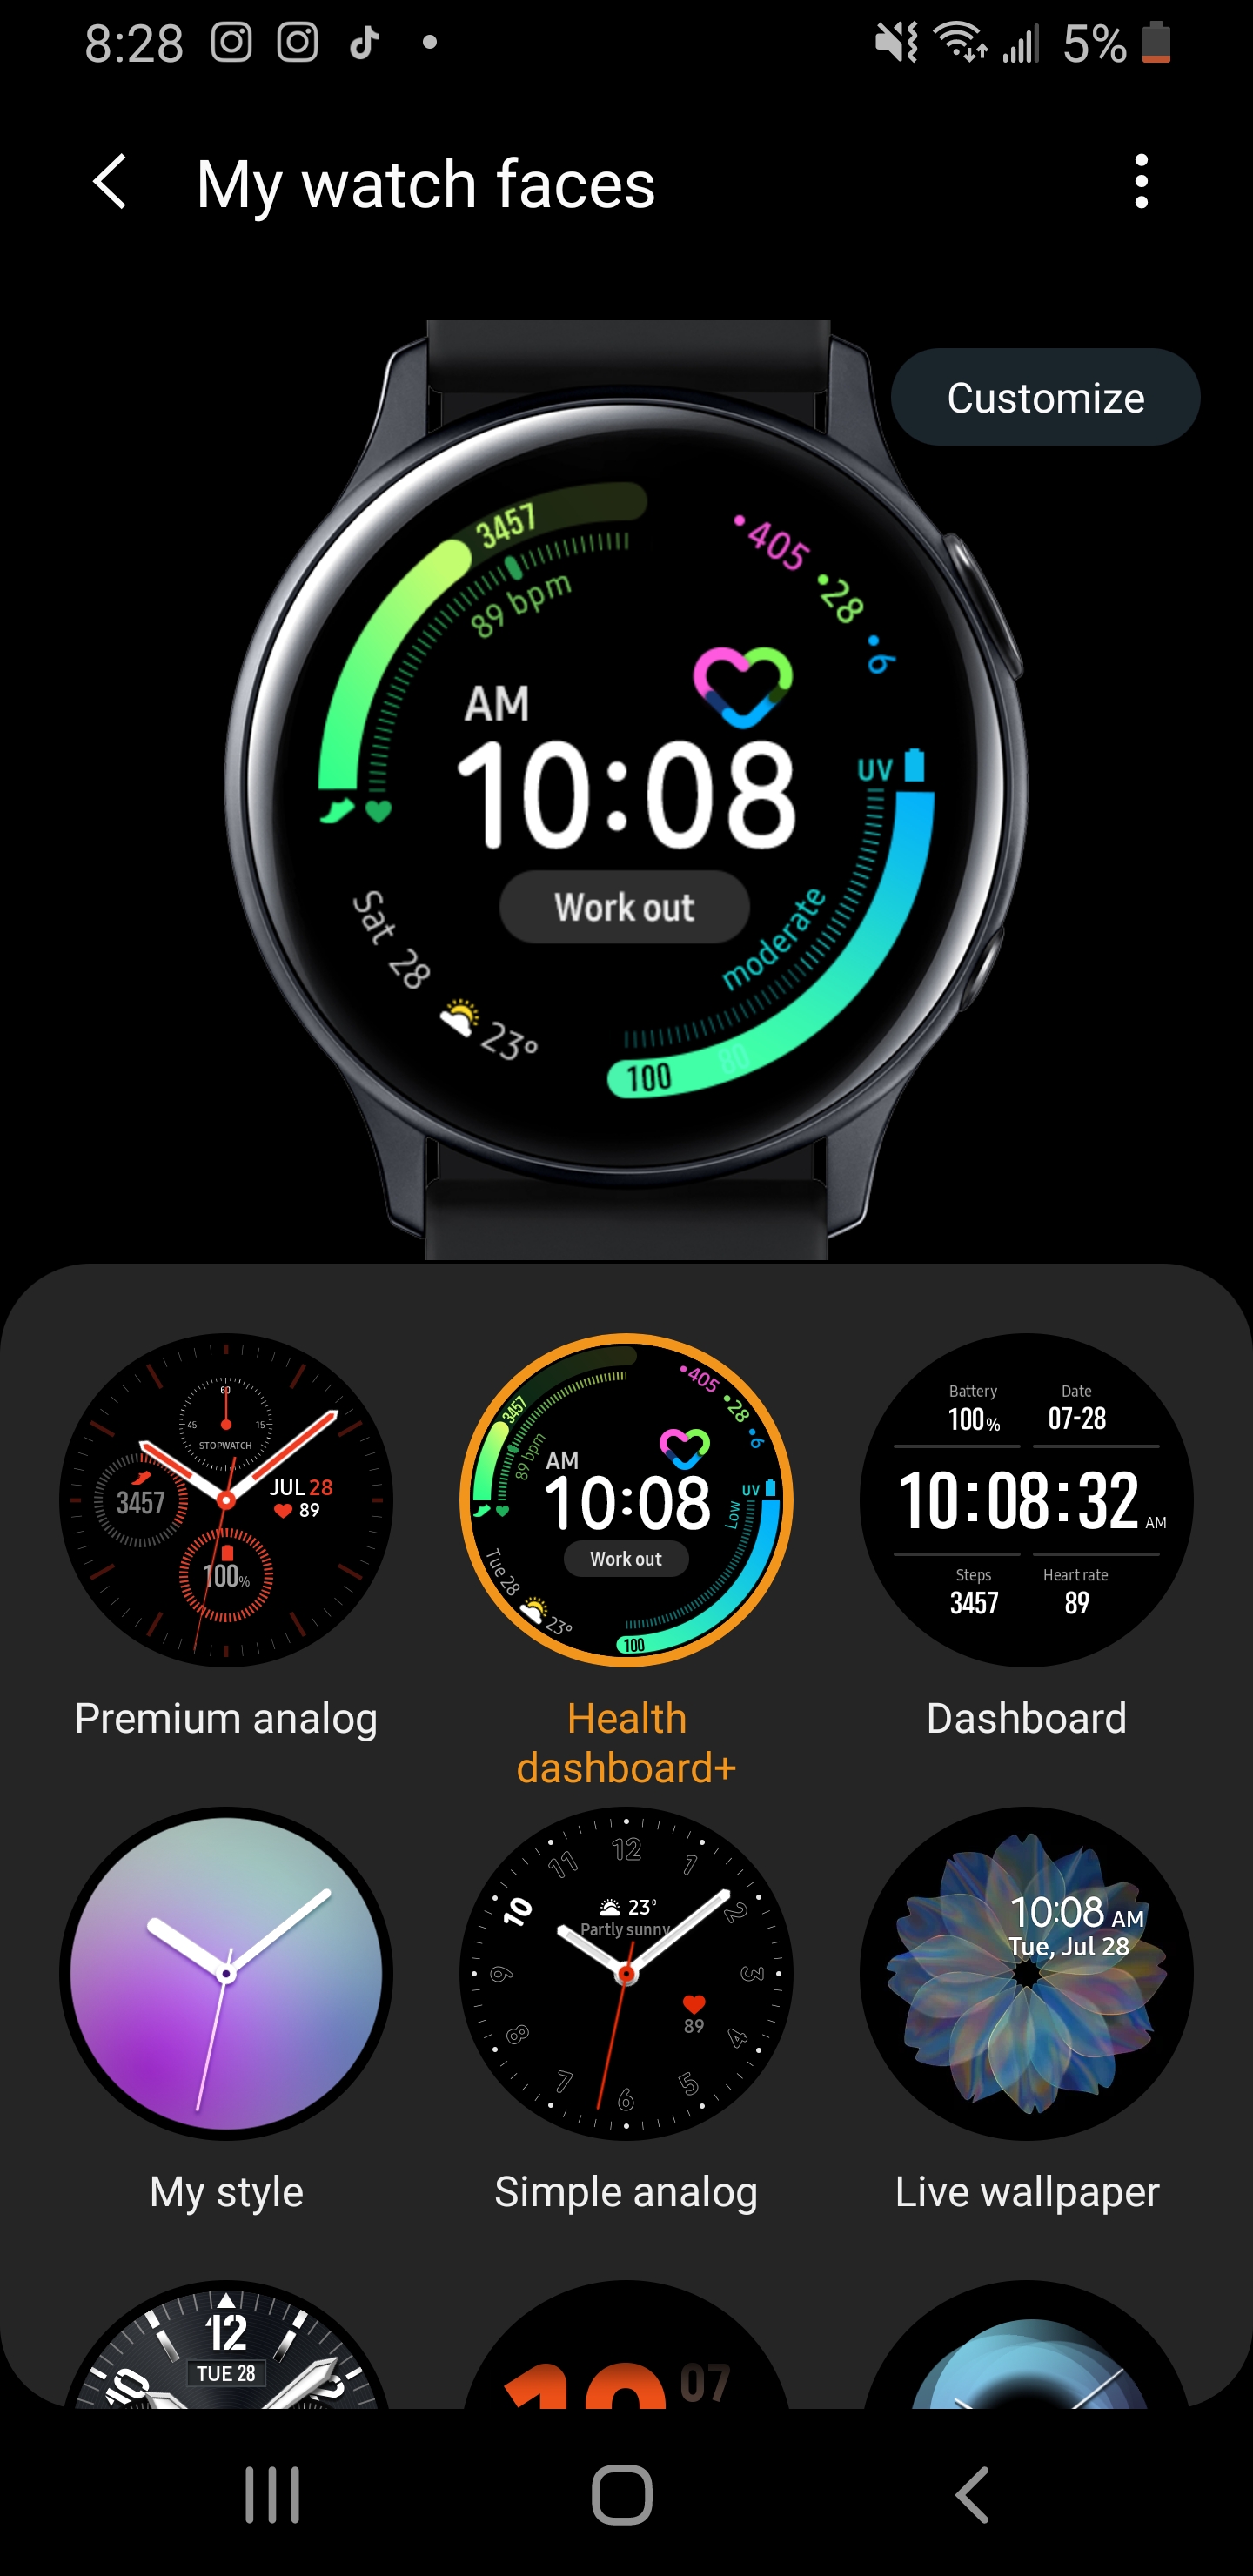 Galaxy watch 2 Feels amazing and we finally have gorgeous LIVE wallpapers  that Ive been wanting since forever Ask me anything about it  rsamsung